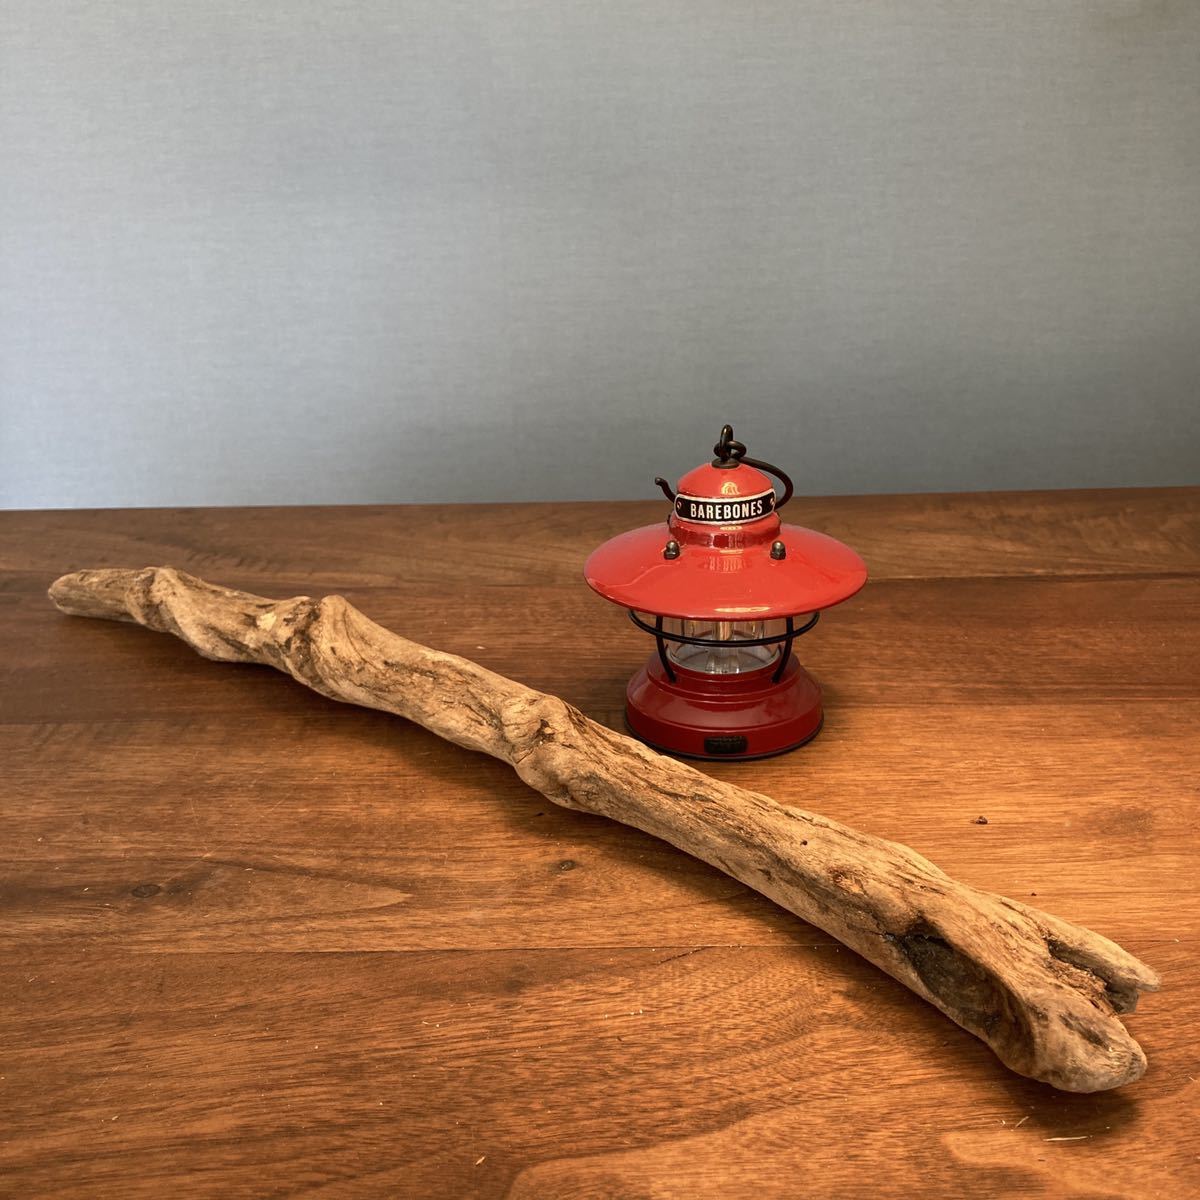 10. Beautifully twisted and uneven driftwood... a natural product, interior, object, Handmade items, interior, miscellaneous goods, ornament, object